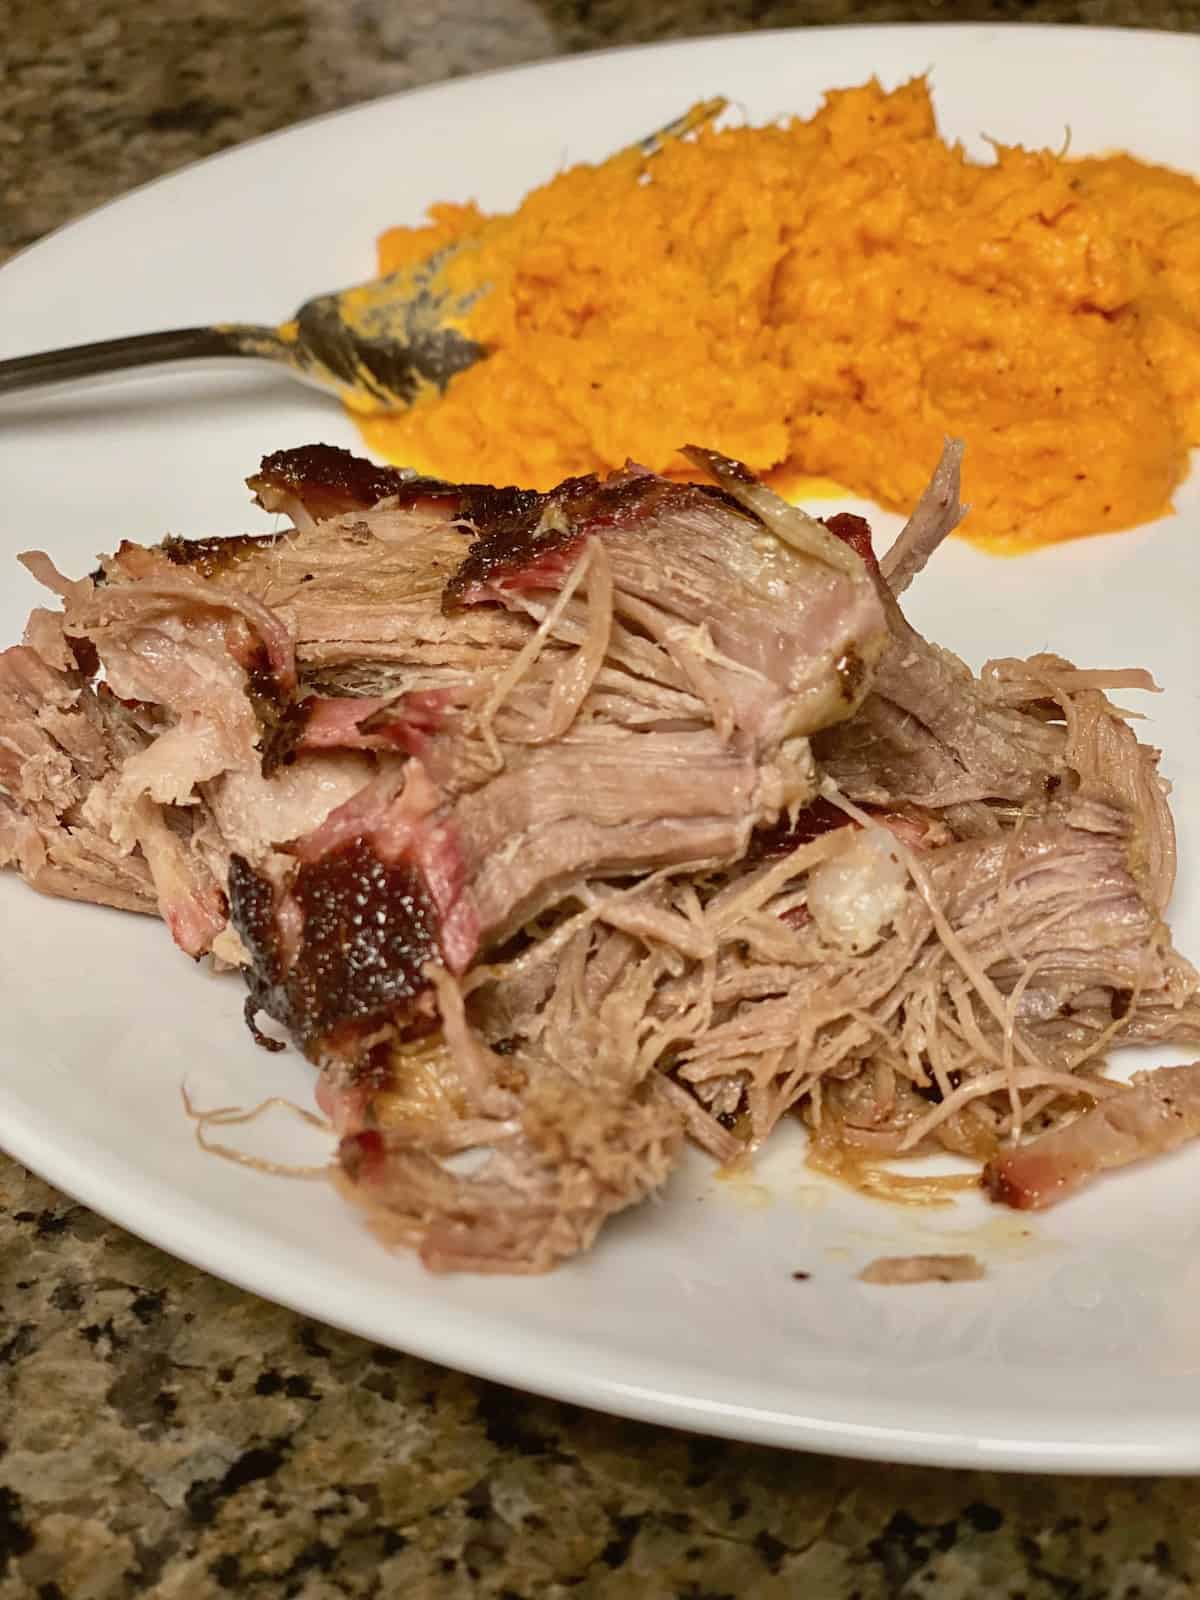 Smoked Pulled Pork Shoulder (pork butt) Plated with Whipped Sweet Potatoes.